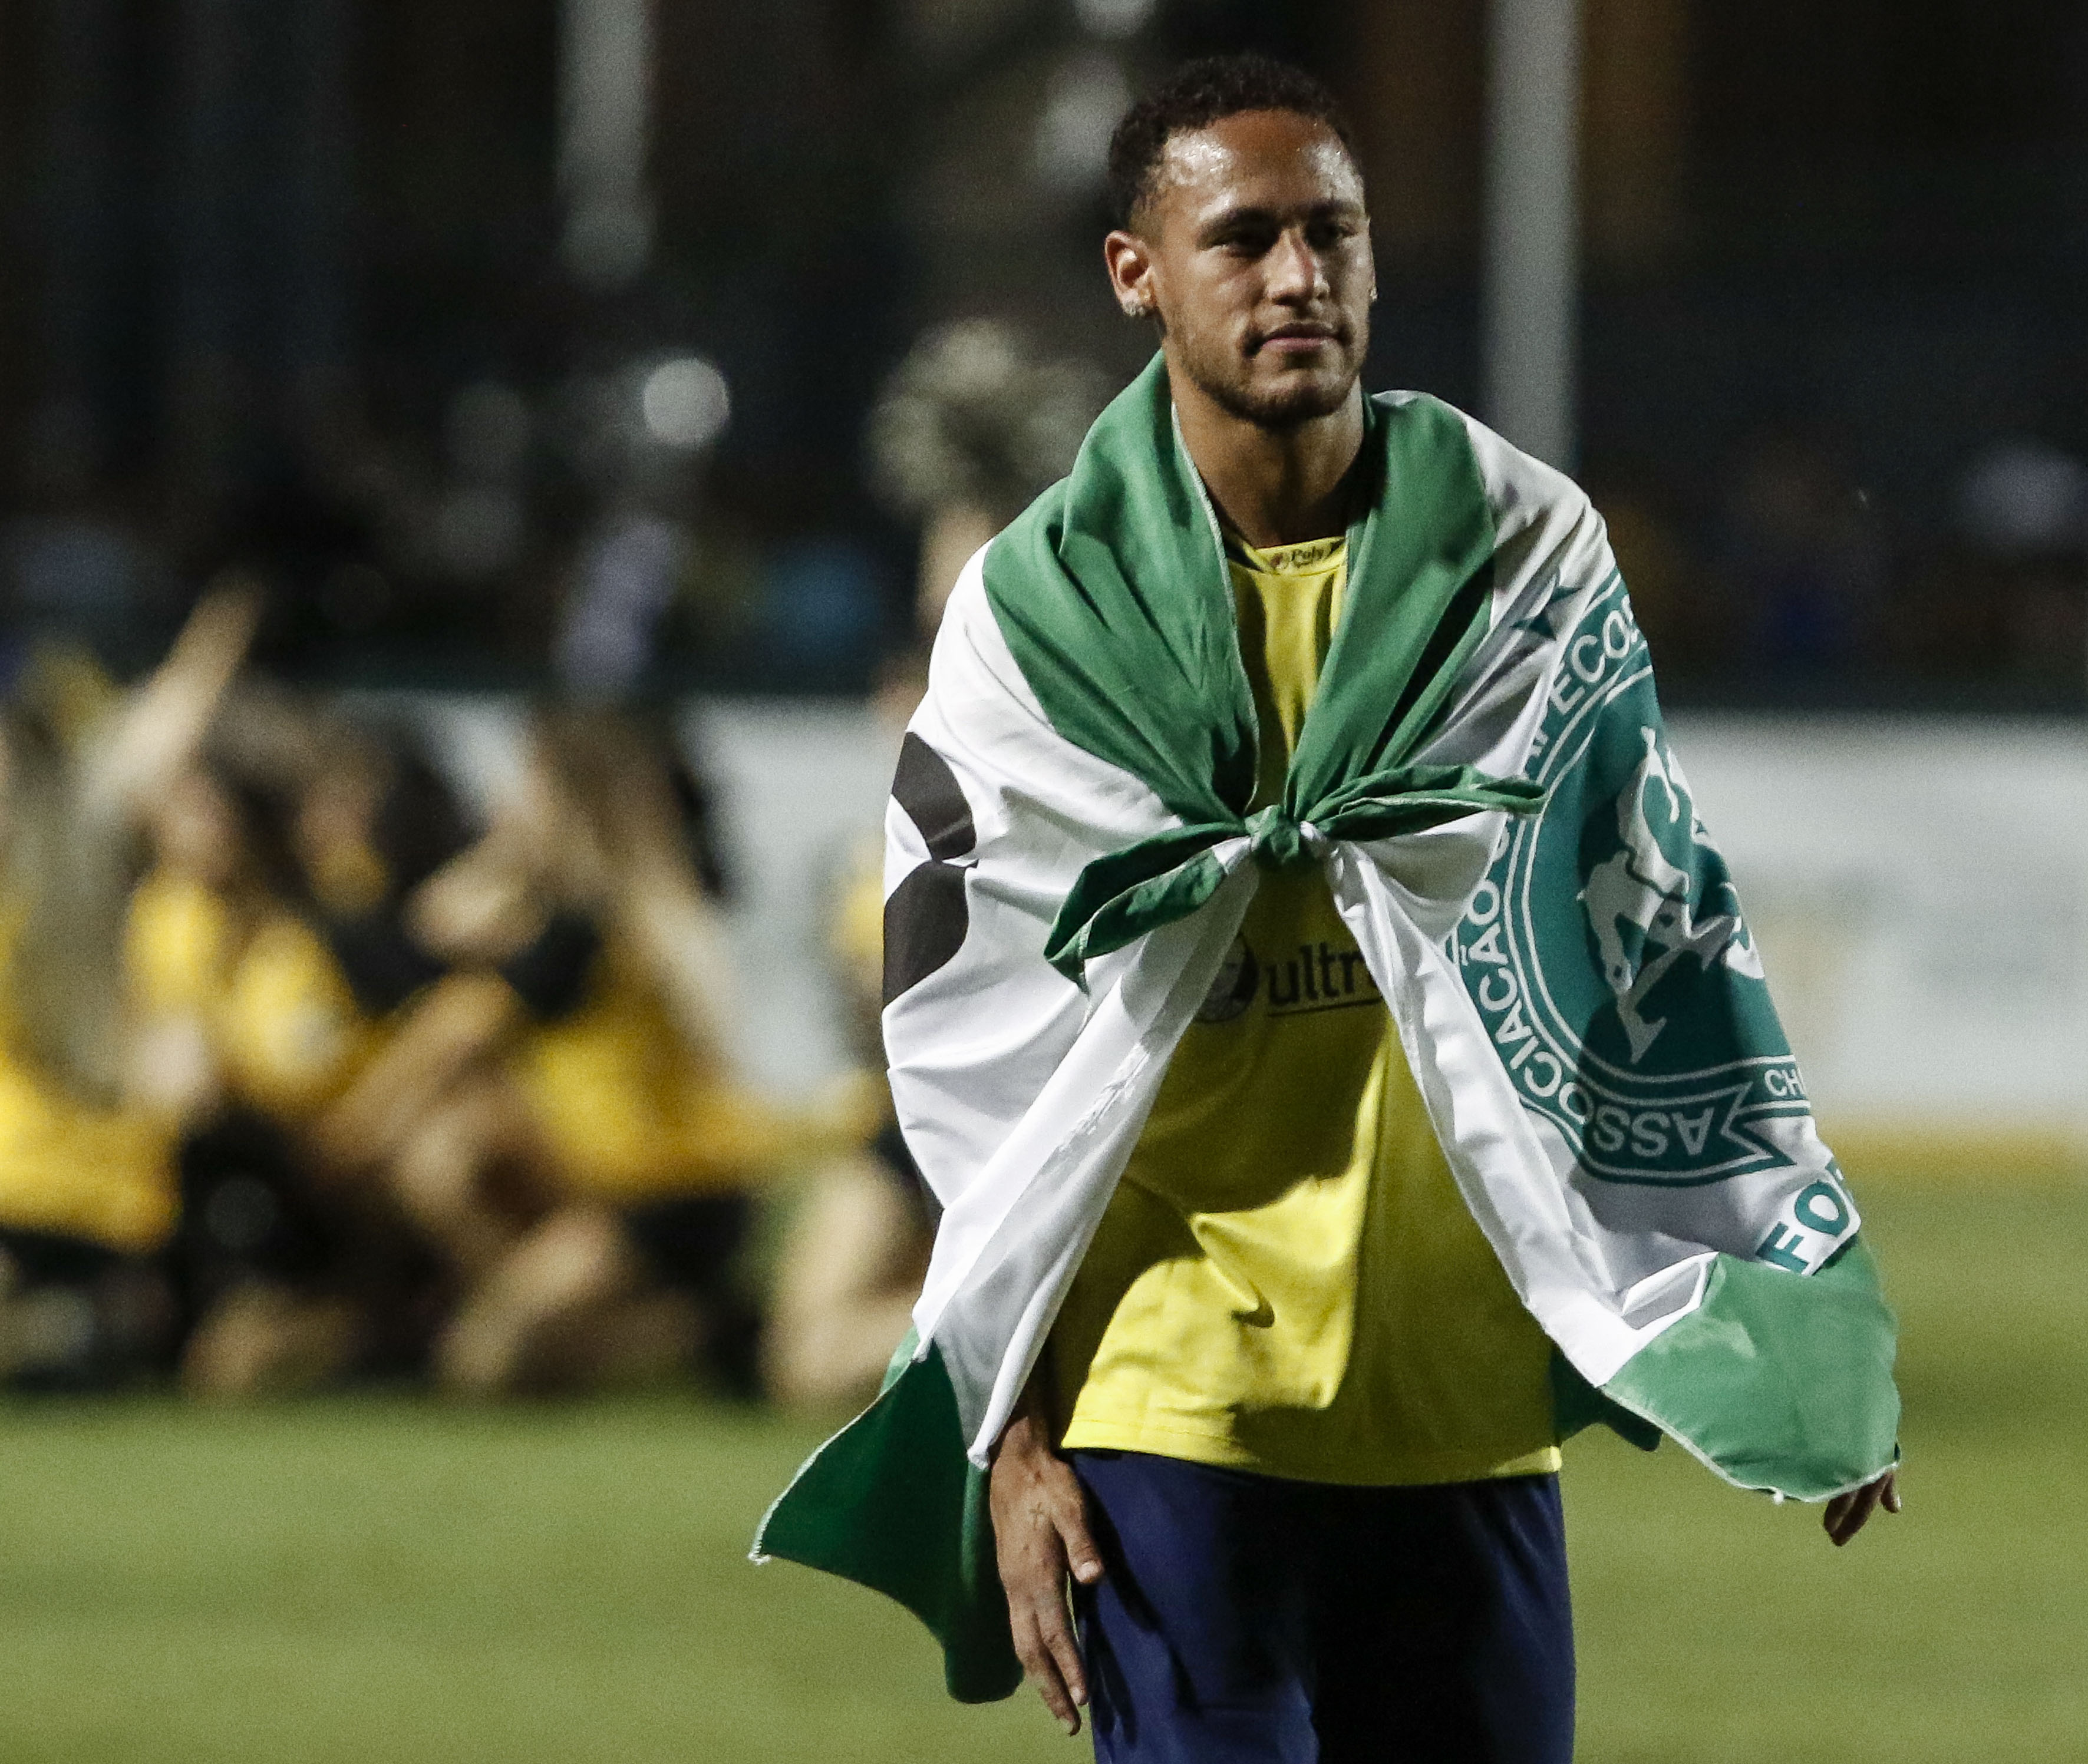 Brazil's Neymar of Spanish team Barcelona uses a flag in tribute to the victims of the November 28, 2016 Colombia plane crash that killed nearly the entire Brazilian Chapecoense football team during the charity football match Ousadia vs Pedalada at Pacaembu stadium in Sao Paulo, on December 22, 2016.
Donations will go to the Neymar Jr. Project Institute in Praia Grande, São Paulo. / AFP / Miguel SCHINCARIOL        (Photo credit should read MIGUEL SCHINCARIOL/AFP/Getty Images)